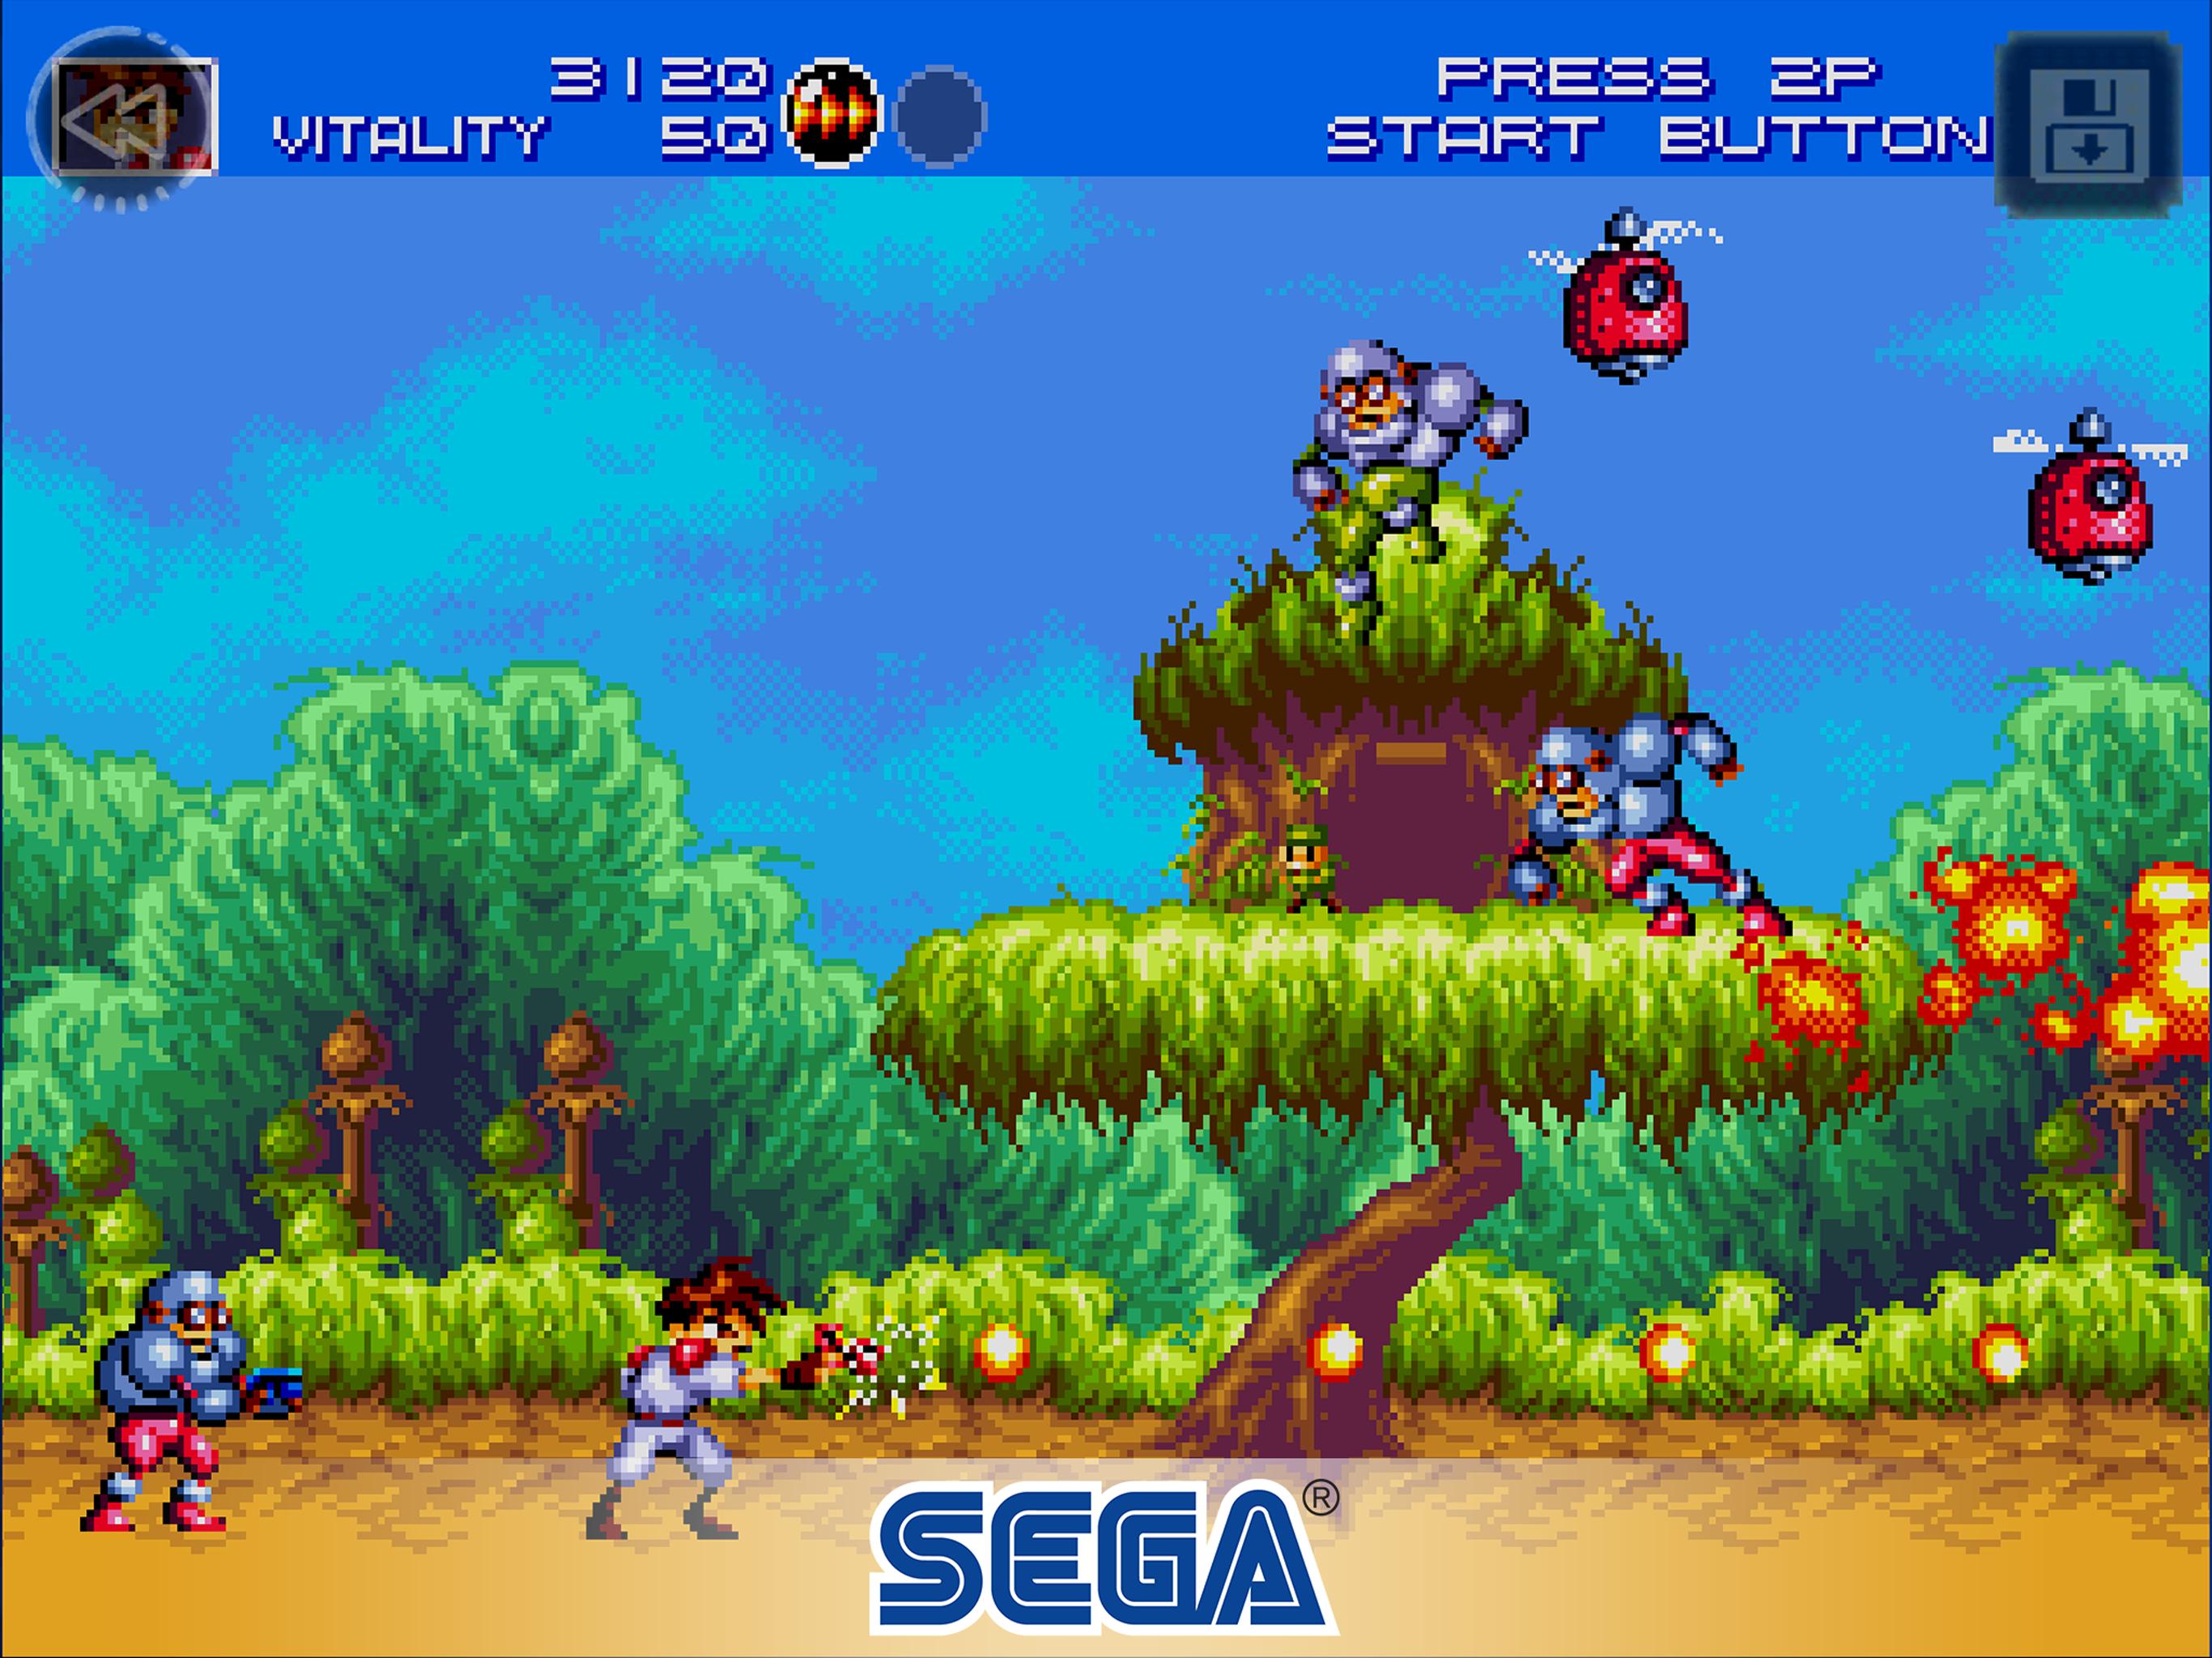 Gunstar Heroes Classic for Android - APK Download